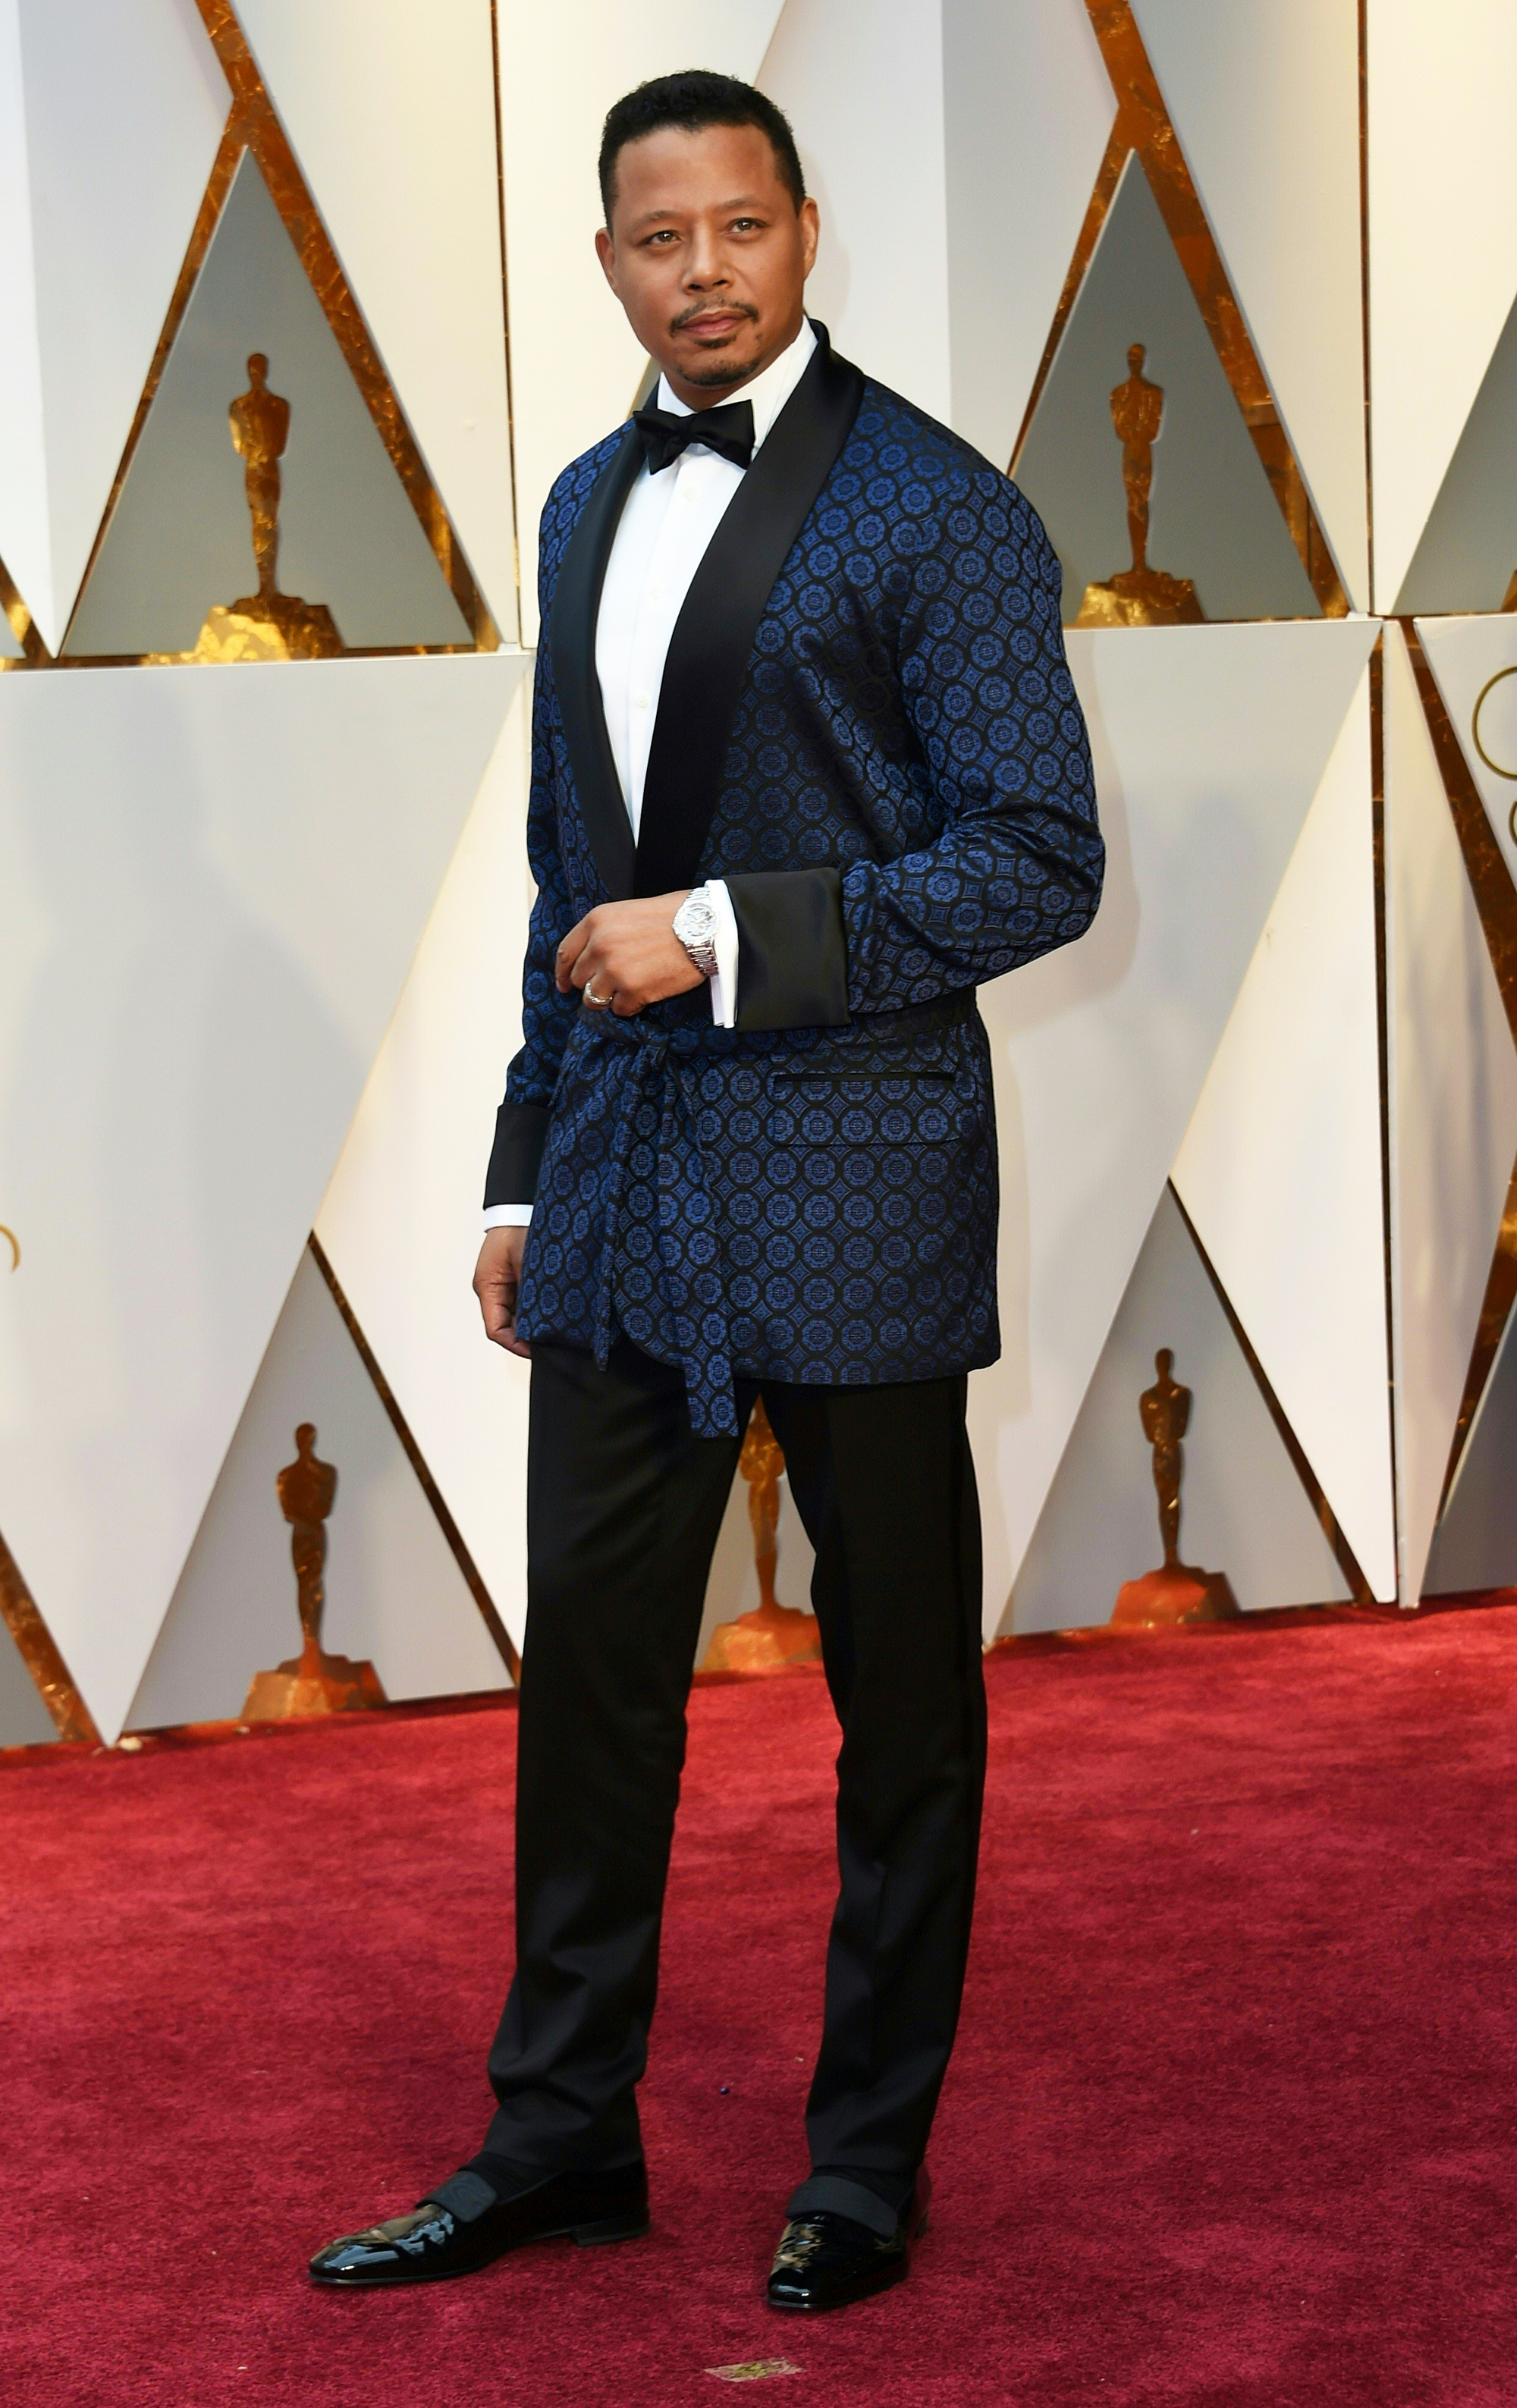 Terrence Howard on the red carpet for the 89th Oscars, on Feb. 26, 2017 in Hollywood, Calif.